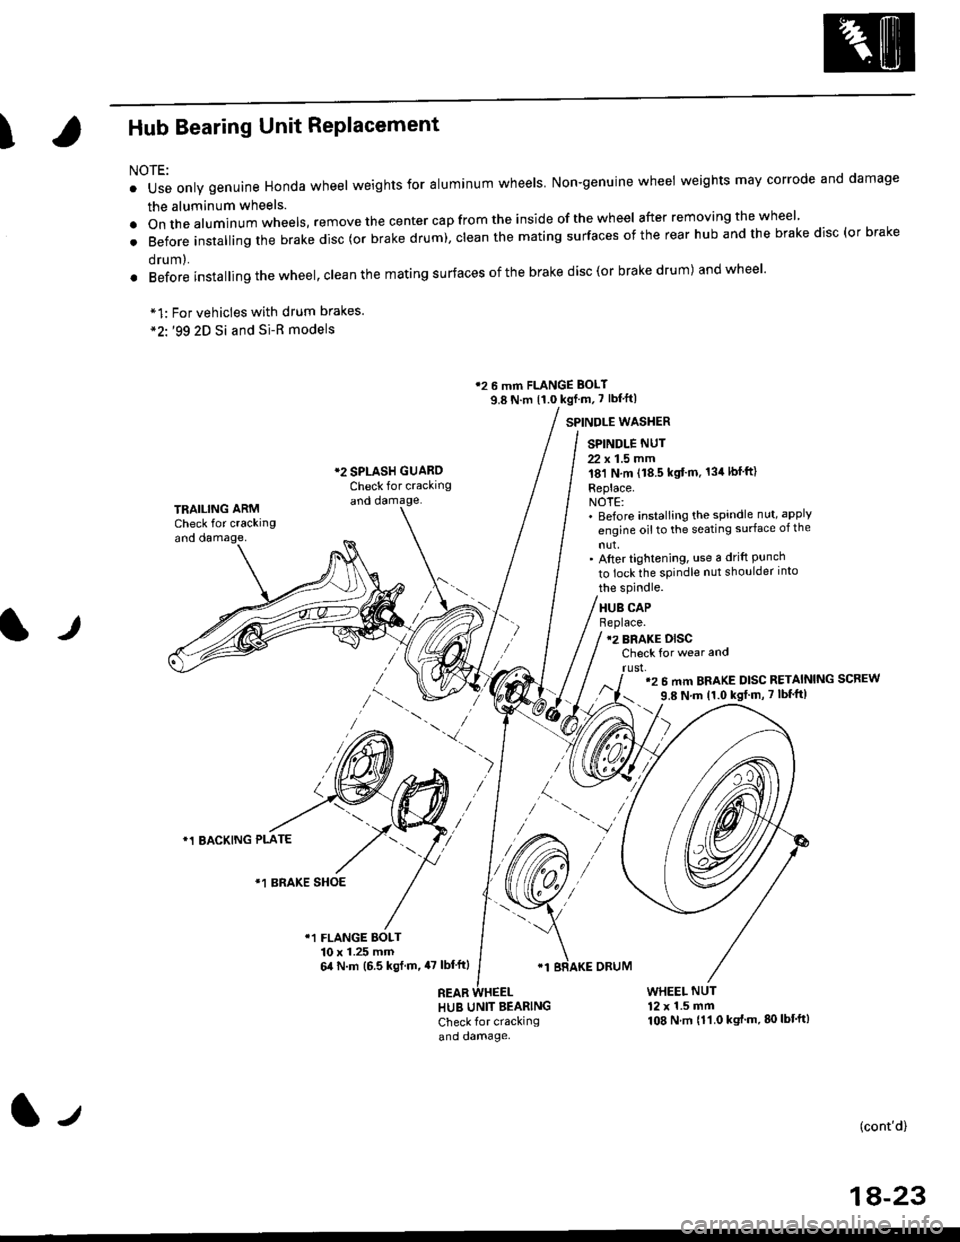 HONDA CIVIC 1999 6.G Workshop Manual IHub Bearing Unit RePlacement
For vehicles with drum brakes.99 2D Si and Si-B models
NOTE:
o Use only genuine Honda wheel weights for aluminum wheels Non-genuine wheel weights may corrode and damage
